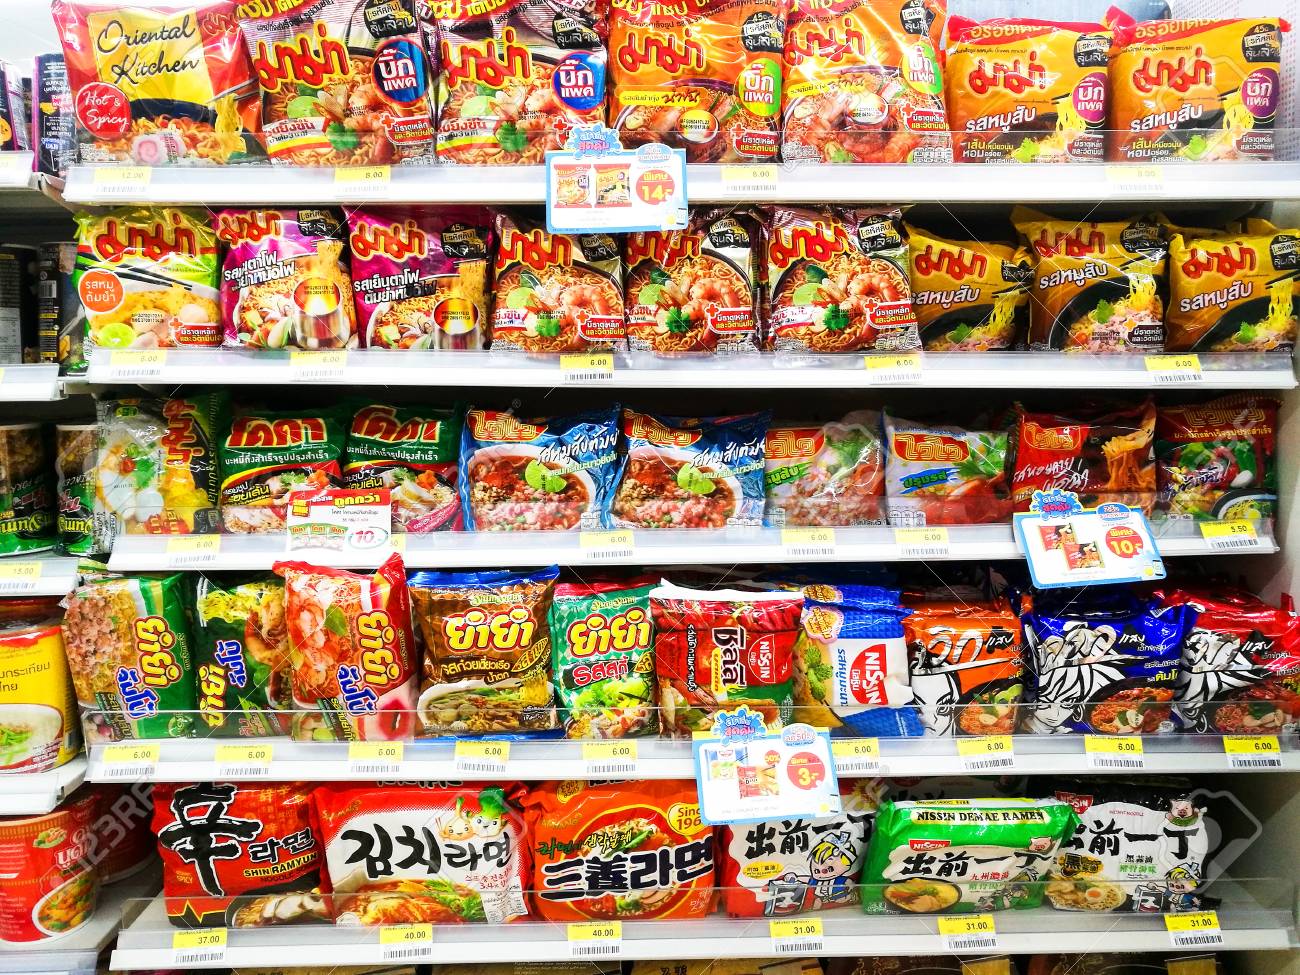 Instant Noodles - Best things you should buy in Thailand